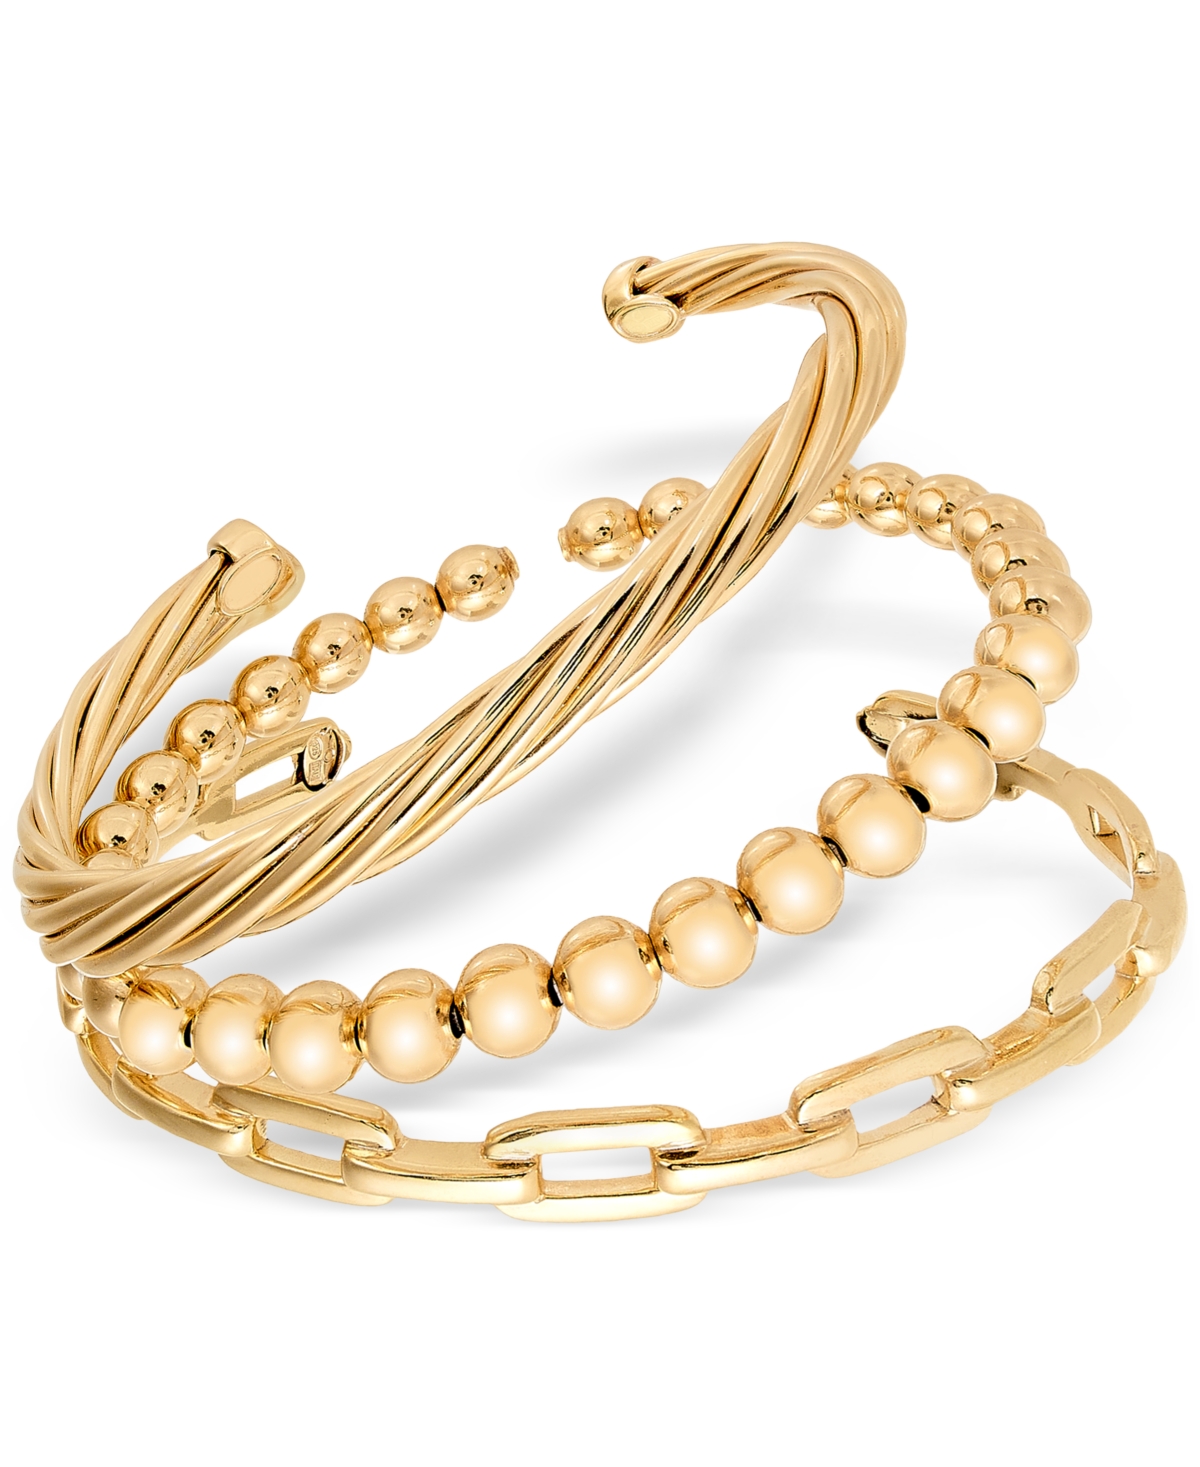 Macy's 3-pc. Set Beaded, Torchon & Paperclip Cuff Bangle Bracelets In 14k Gold-plated Sterling Silver In Gold Over Silver